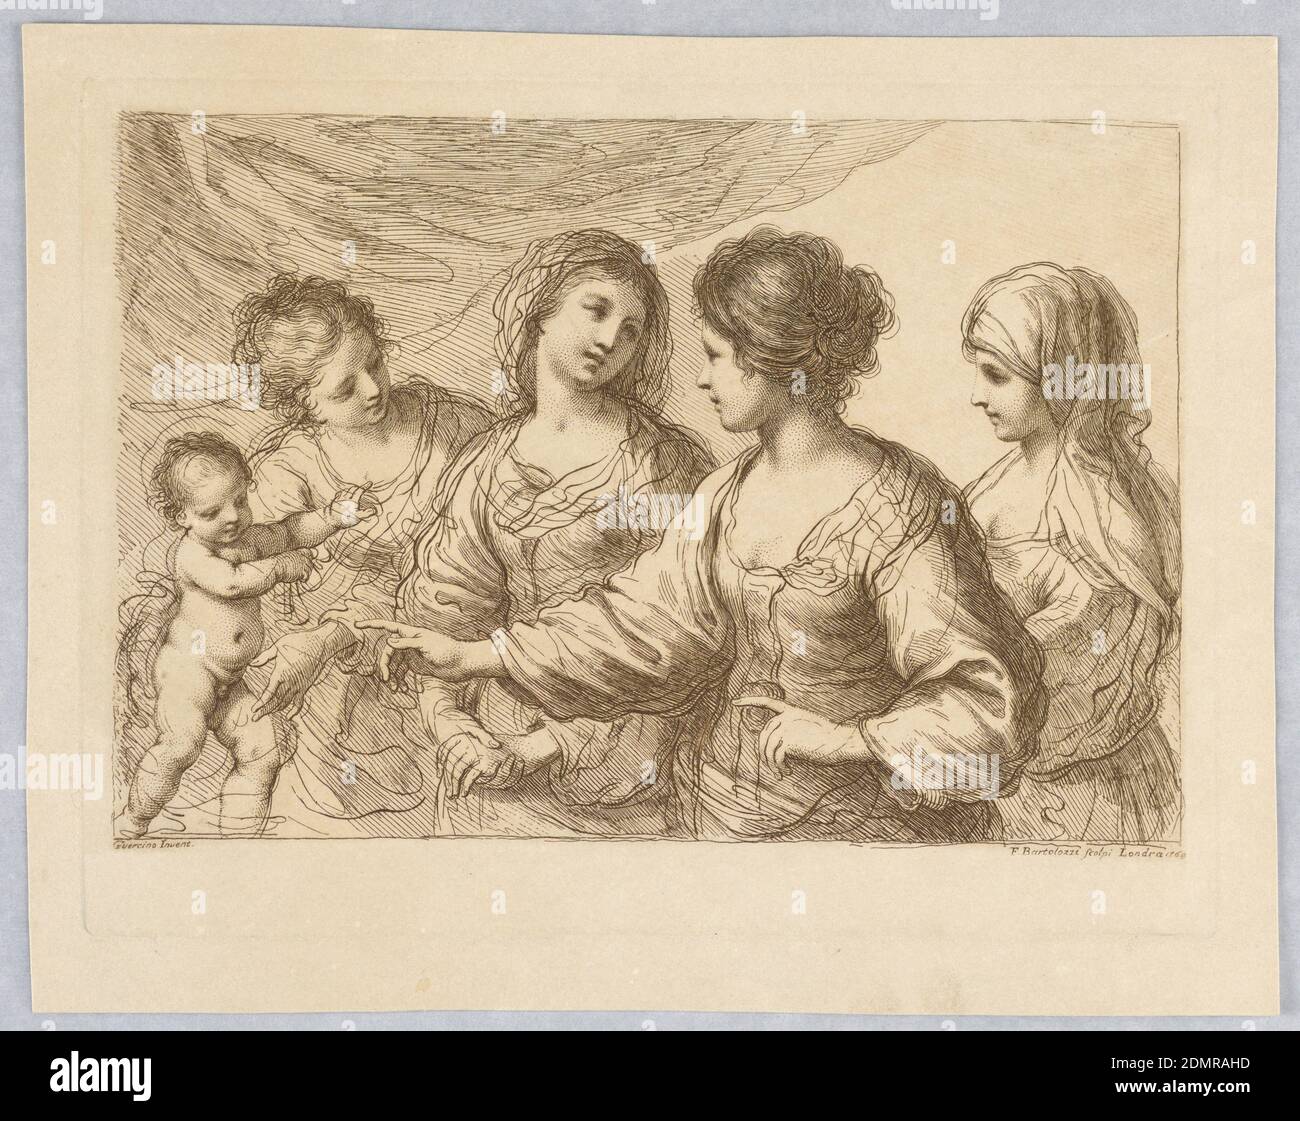 Four Women With a Boy, Francesco Bartolozzi, Italian, active England, 1727–1815, Giovanni Francesco Barbieri (called Guercino), Italian, 1591 – 1666, Engraving in brown ink on beige paper, Four women before a curtain. The Child standing at the left, one woman (far left) supporting him, another, pointing to him with both hands. Below, the artist' names and place and date., Italy, 1764, Print Stock Photo